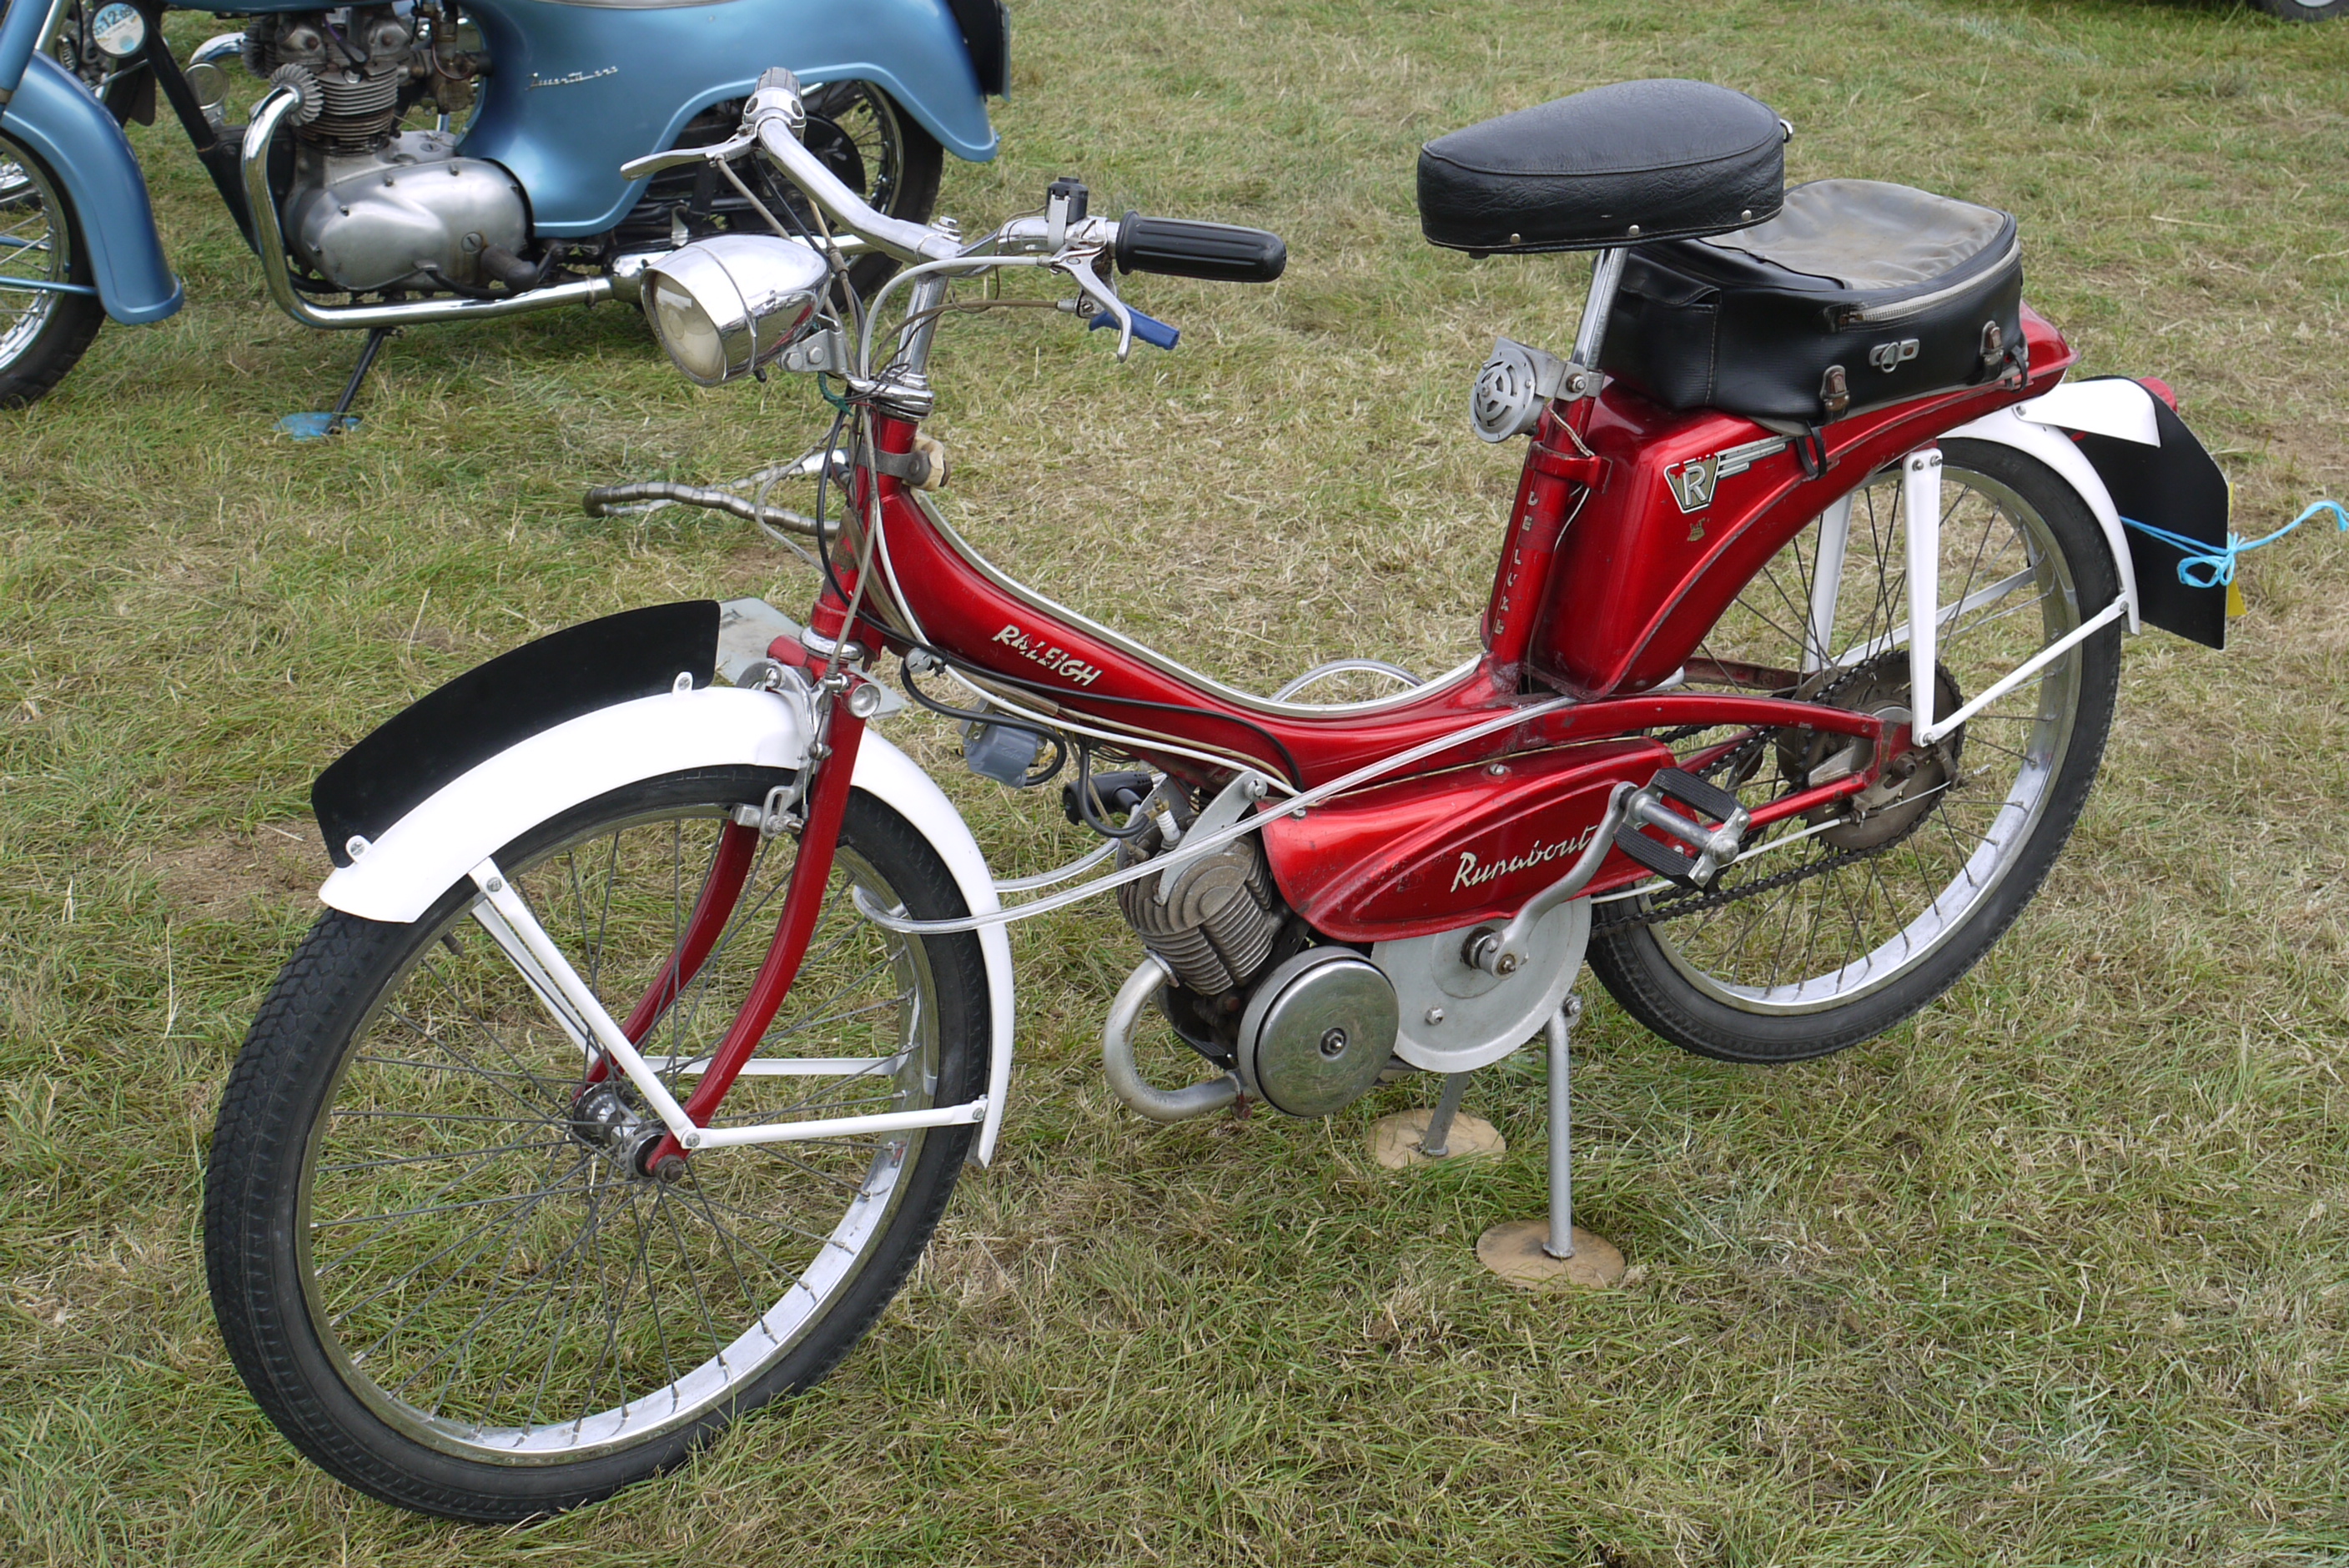 Raleigh_Runabout_Moped_-_Flickr_-_mick_-